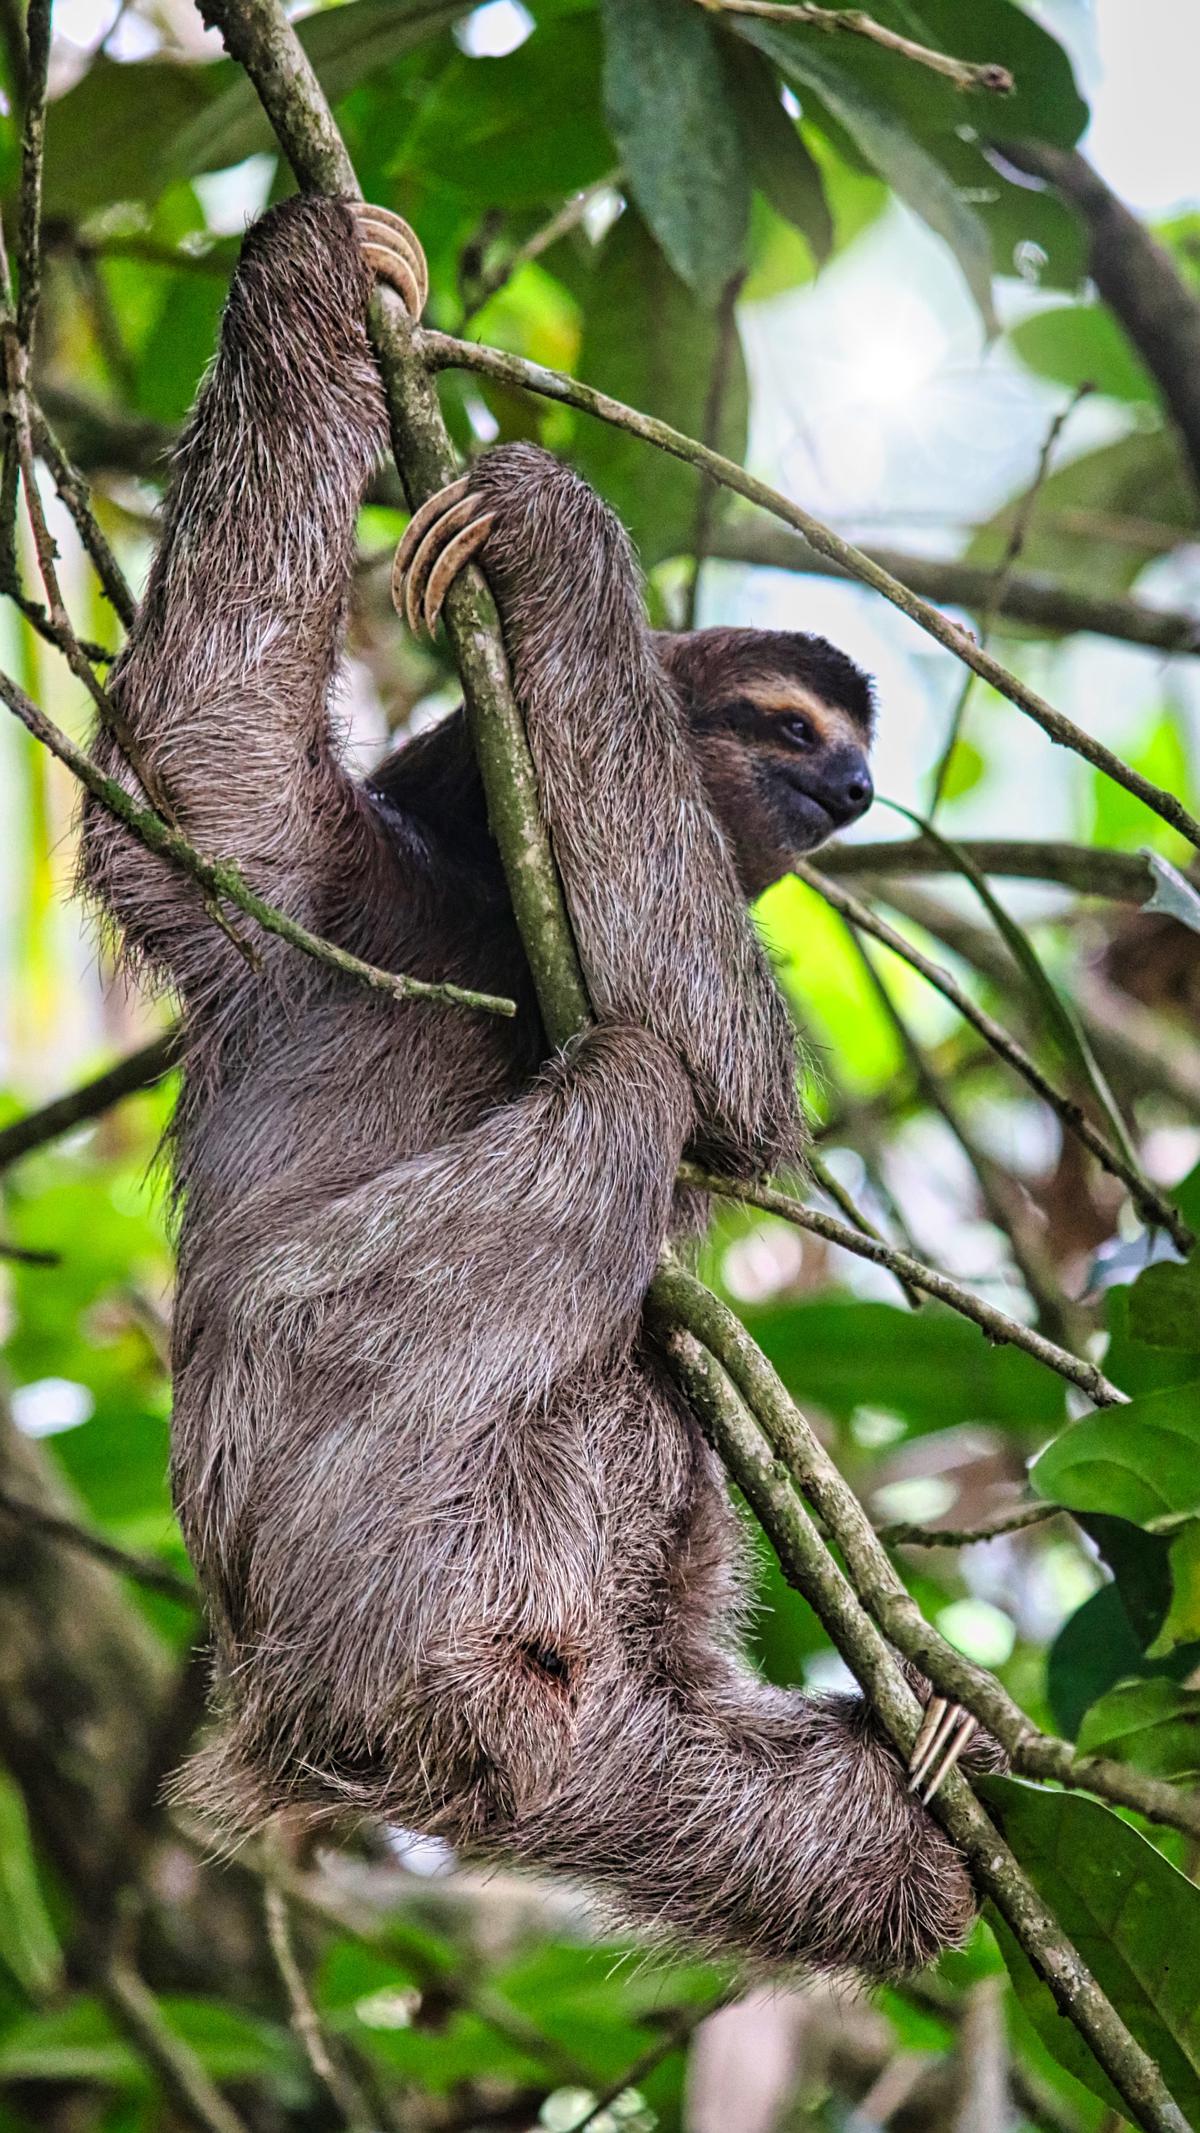 Illustration of a sloth hanging from a branch.